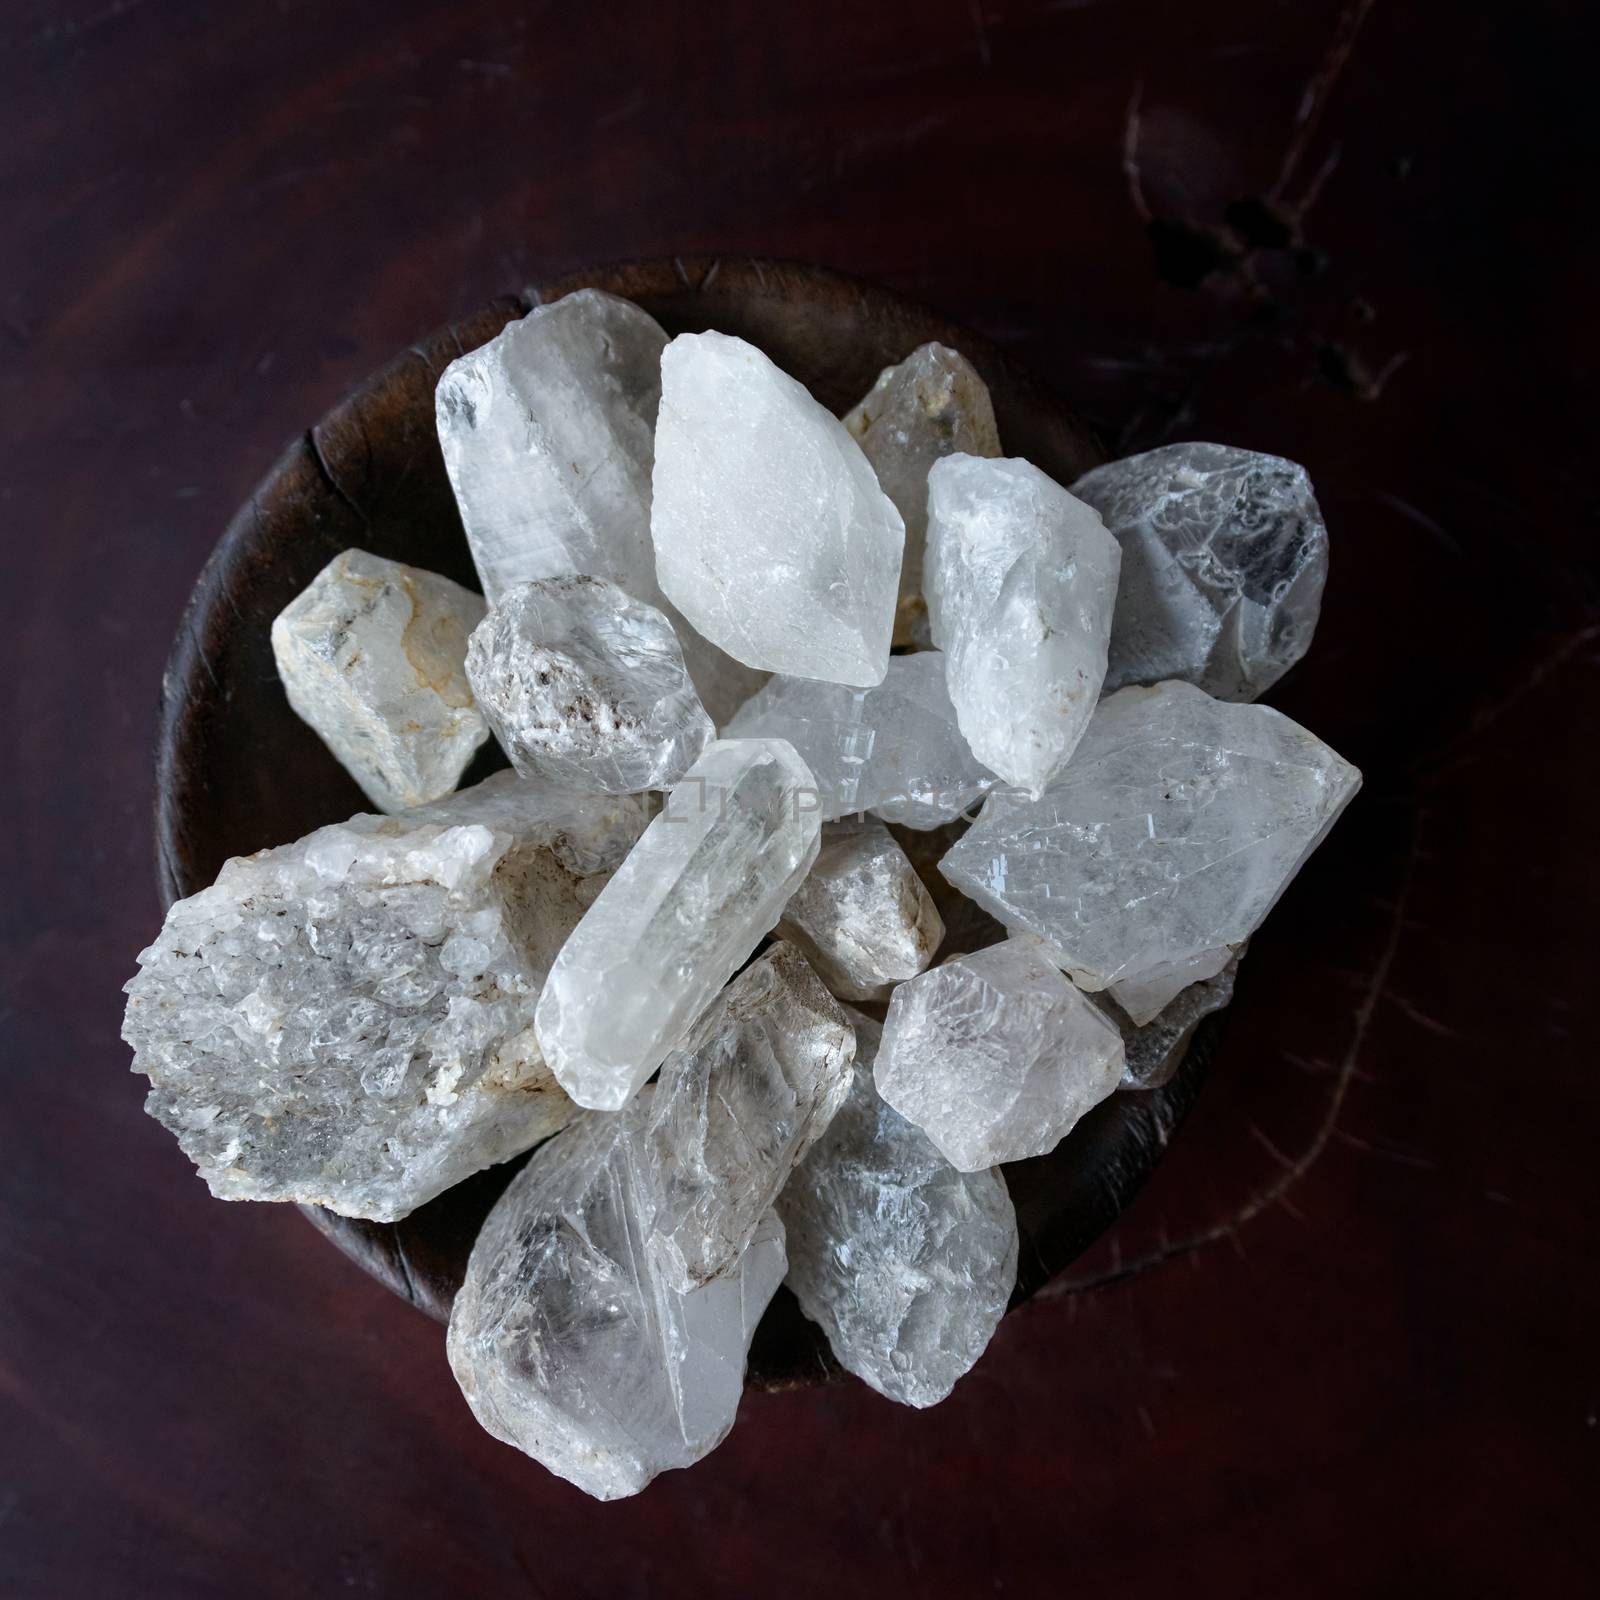 Crystals in a wooden bowl